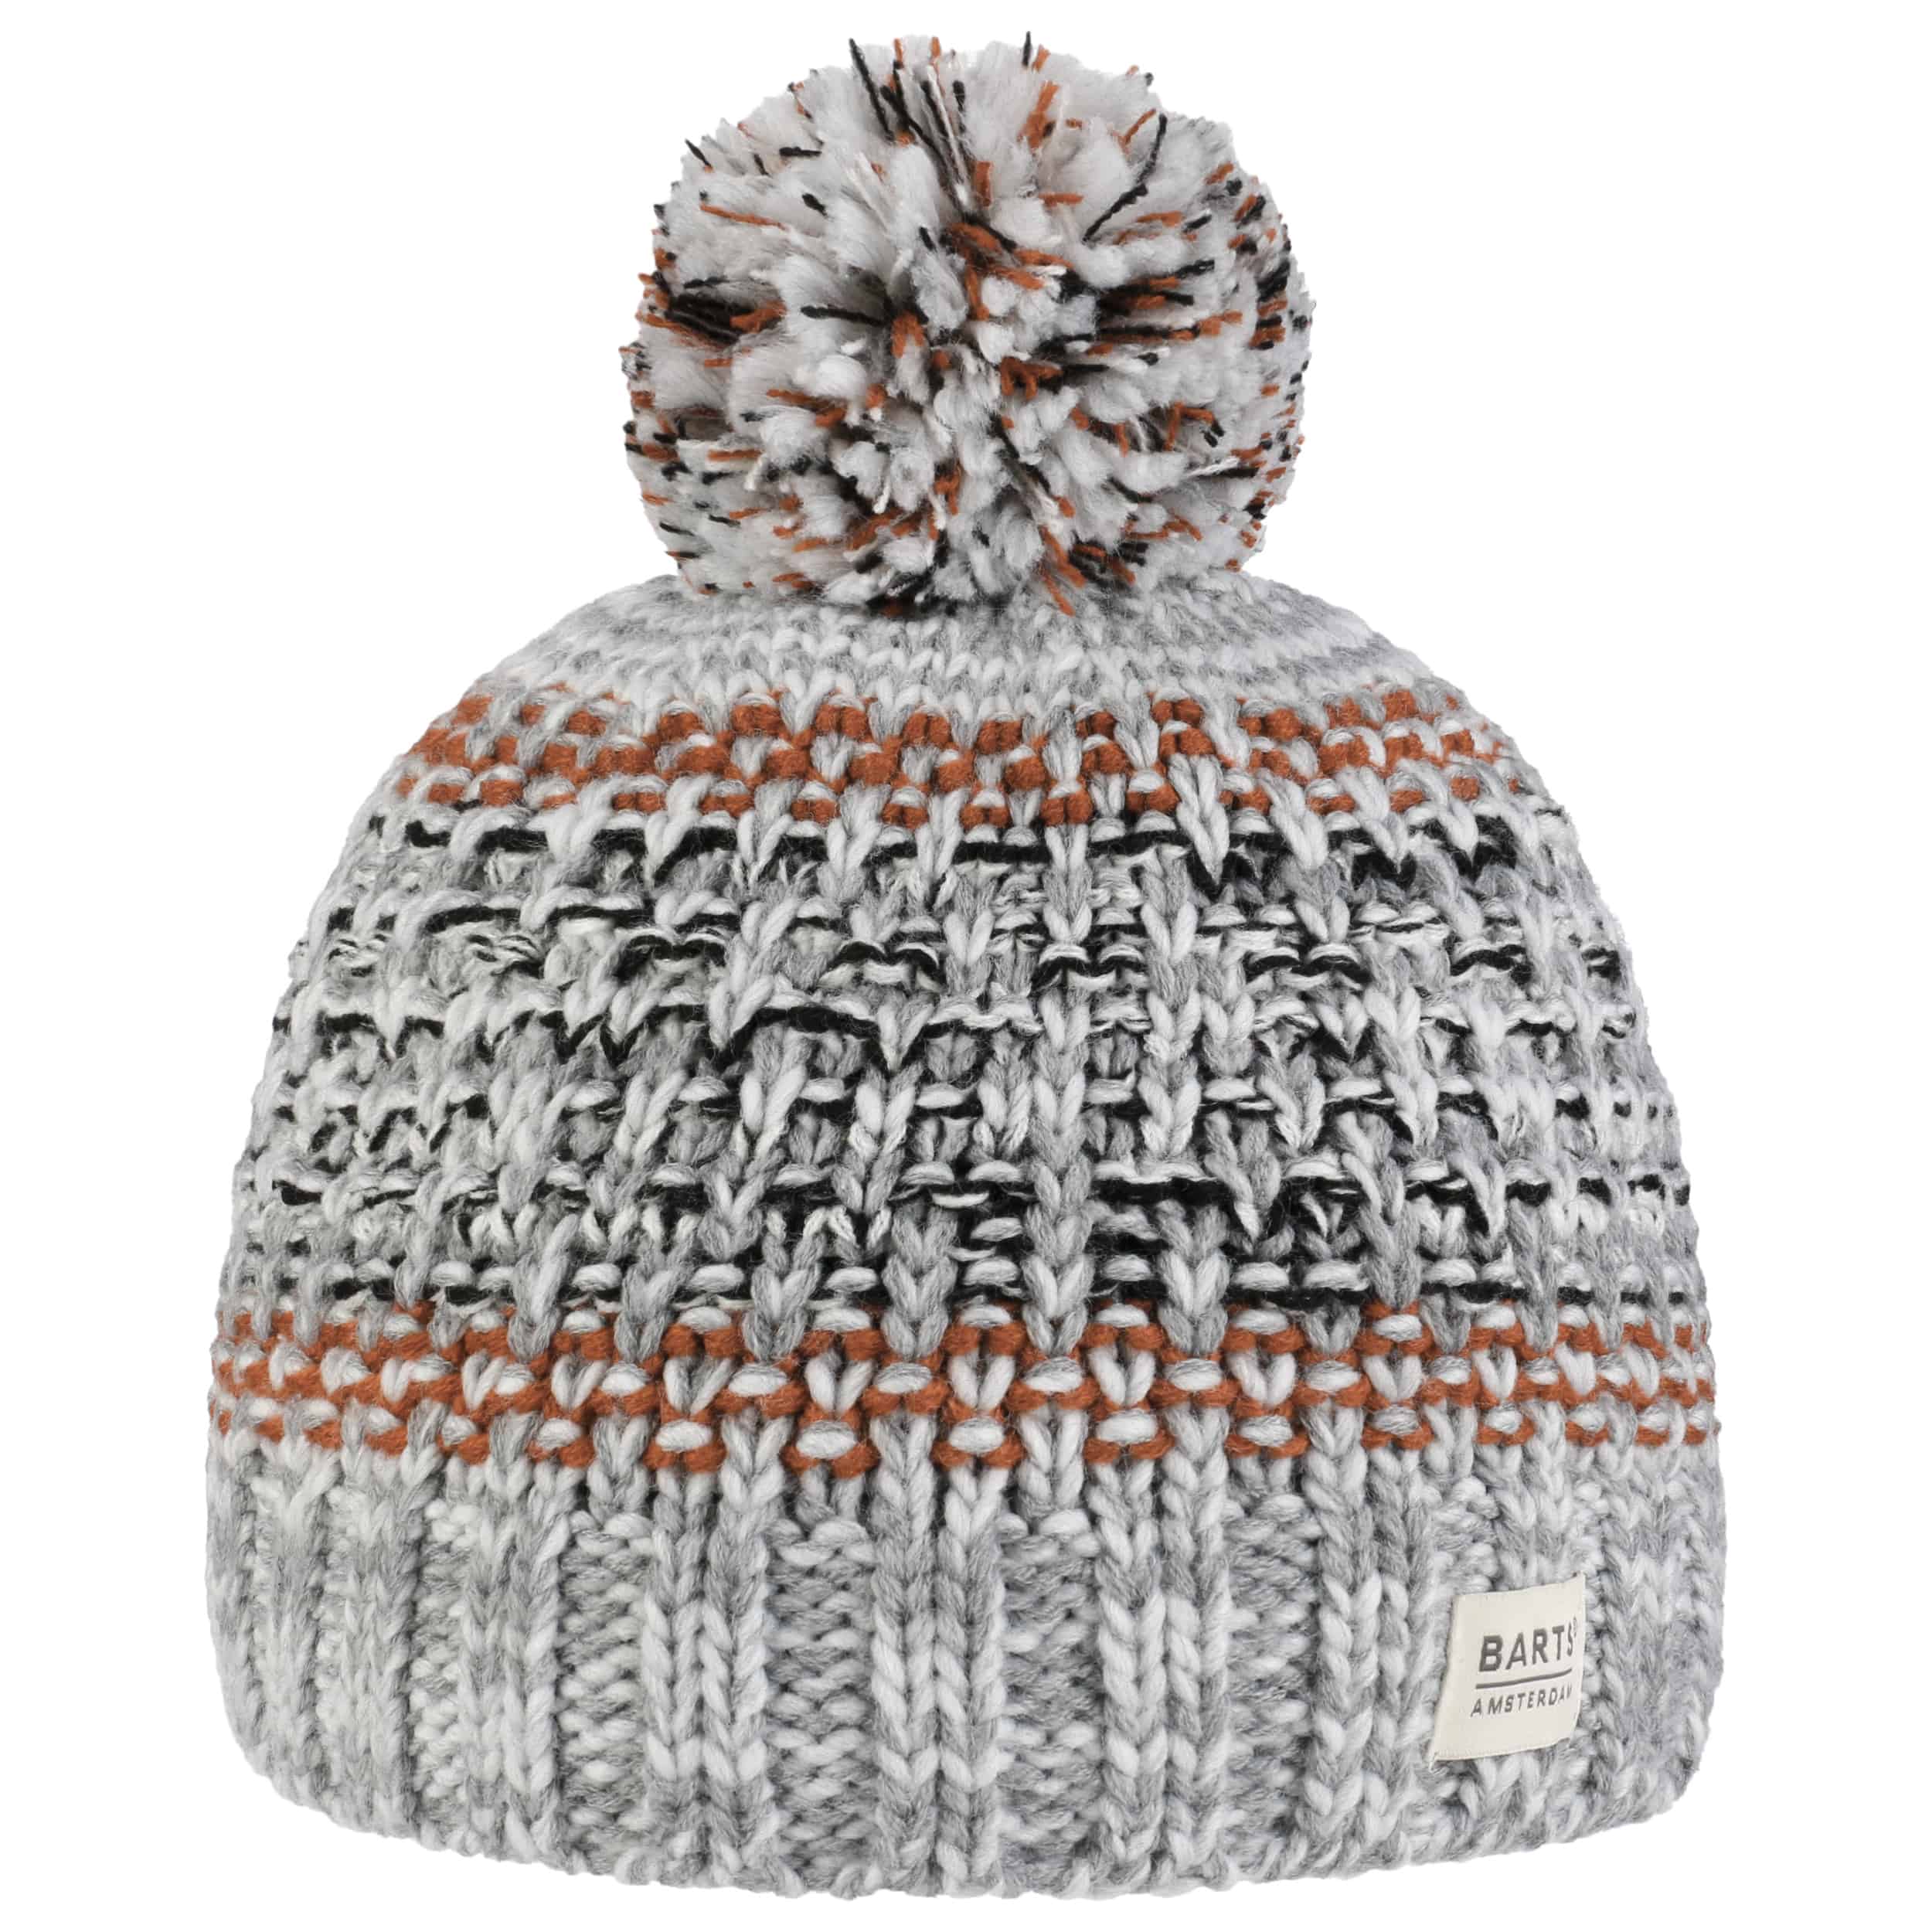 Nathanial Beanie Hat by Barts - 26,95 £